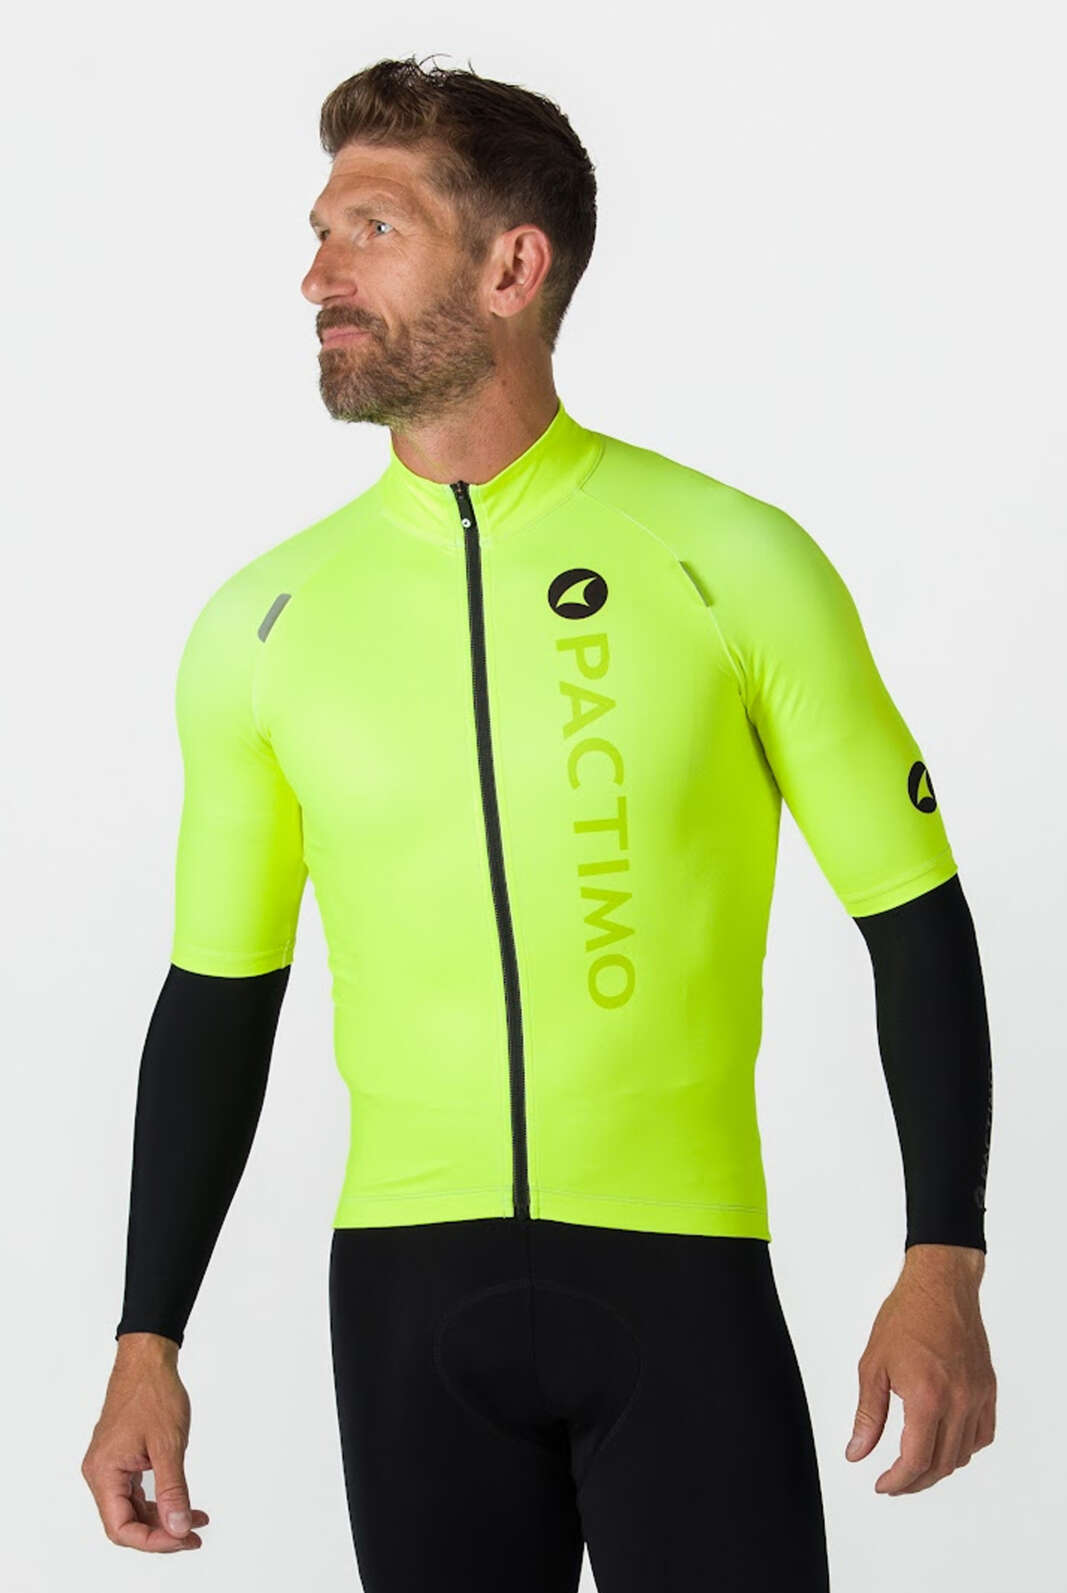 Men's High-Viz Water Resistant Cycling Jersey - Front View